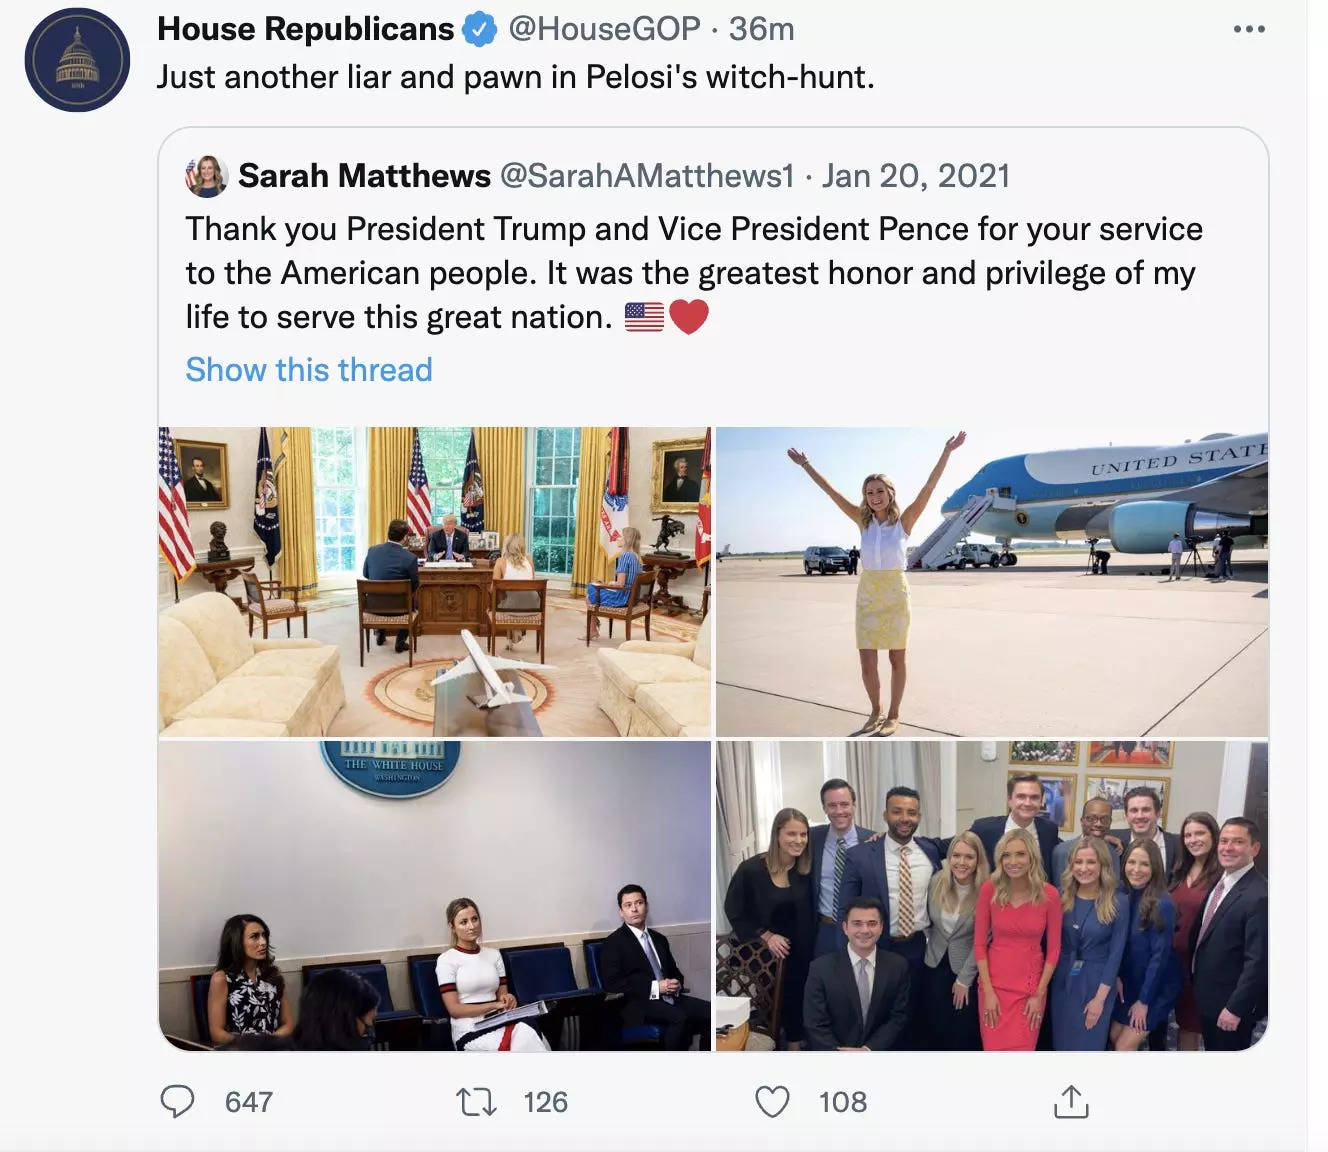 A deleted tweet from the official House Republican account